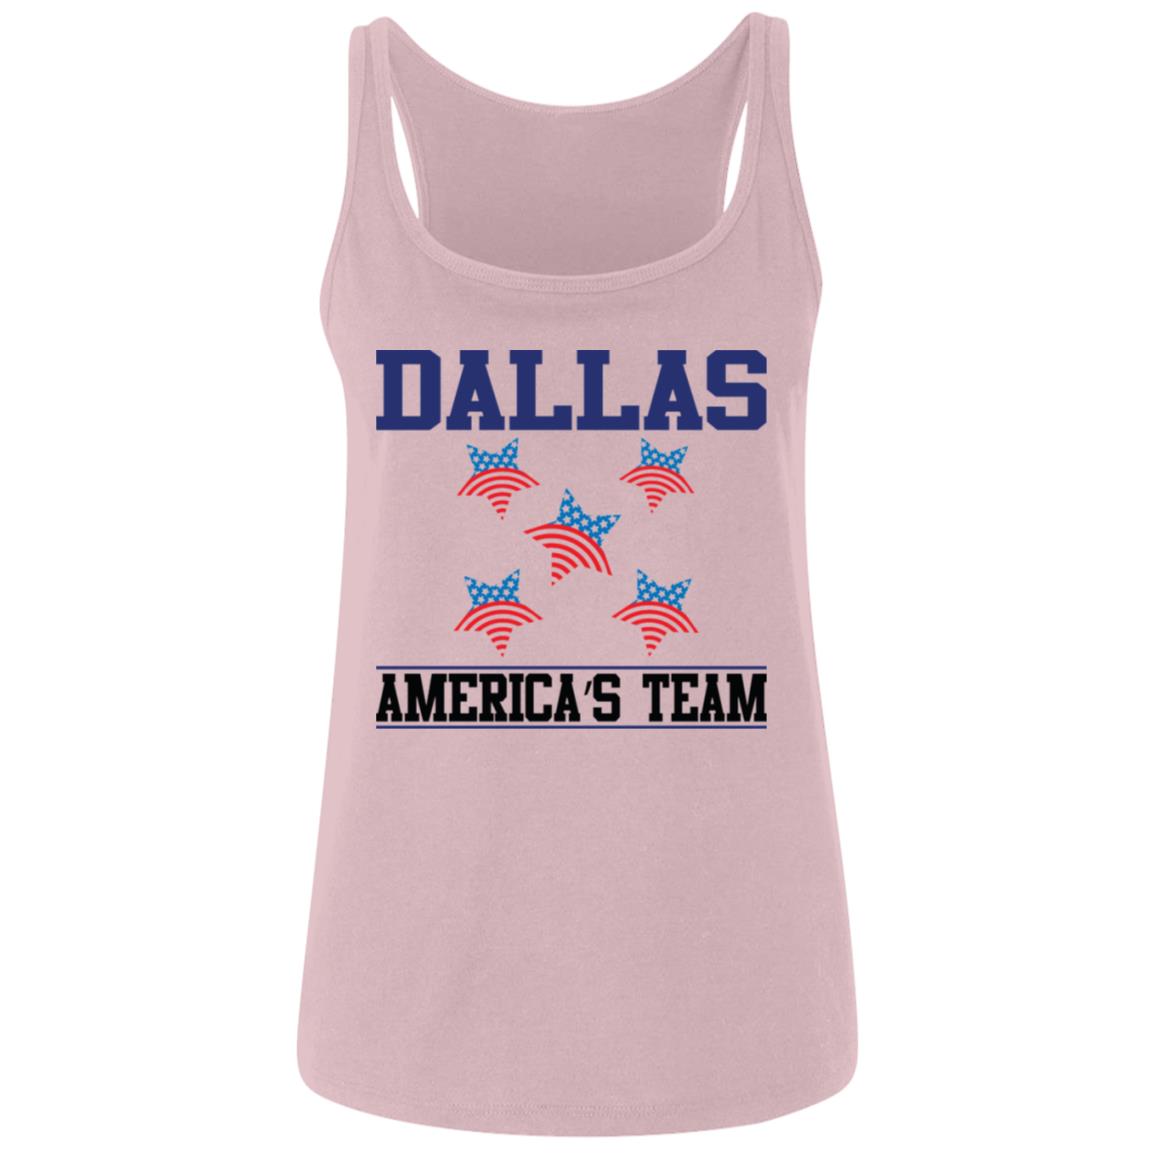 Dallas (AT) Ladies' Relaxed Jersey Tank